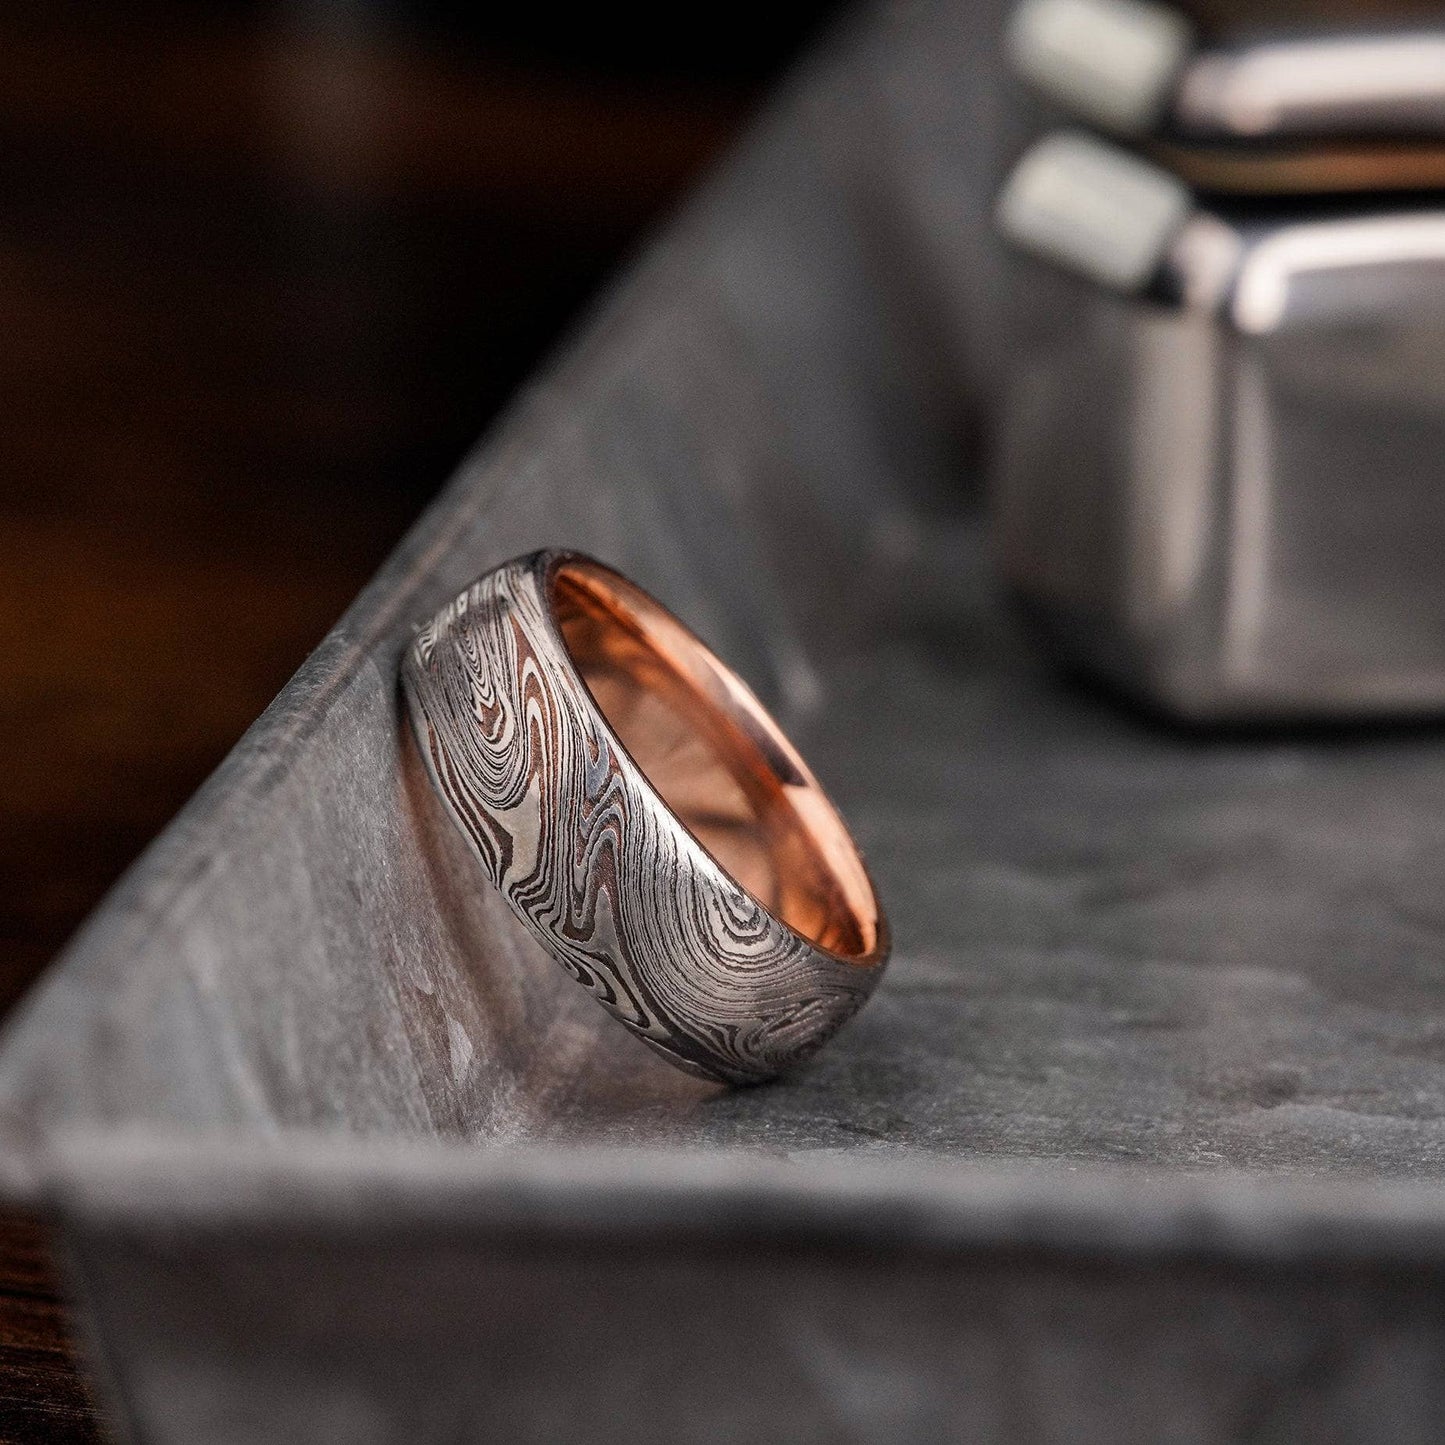 The Halford - Men's Wedding Rings - Manly Bands